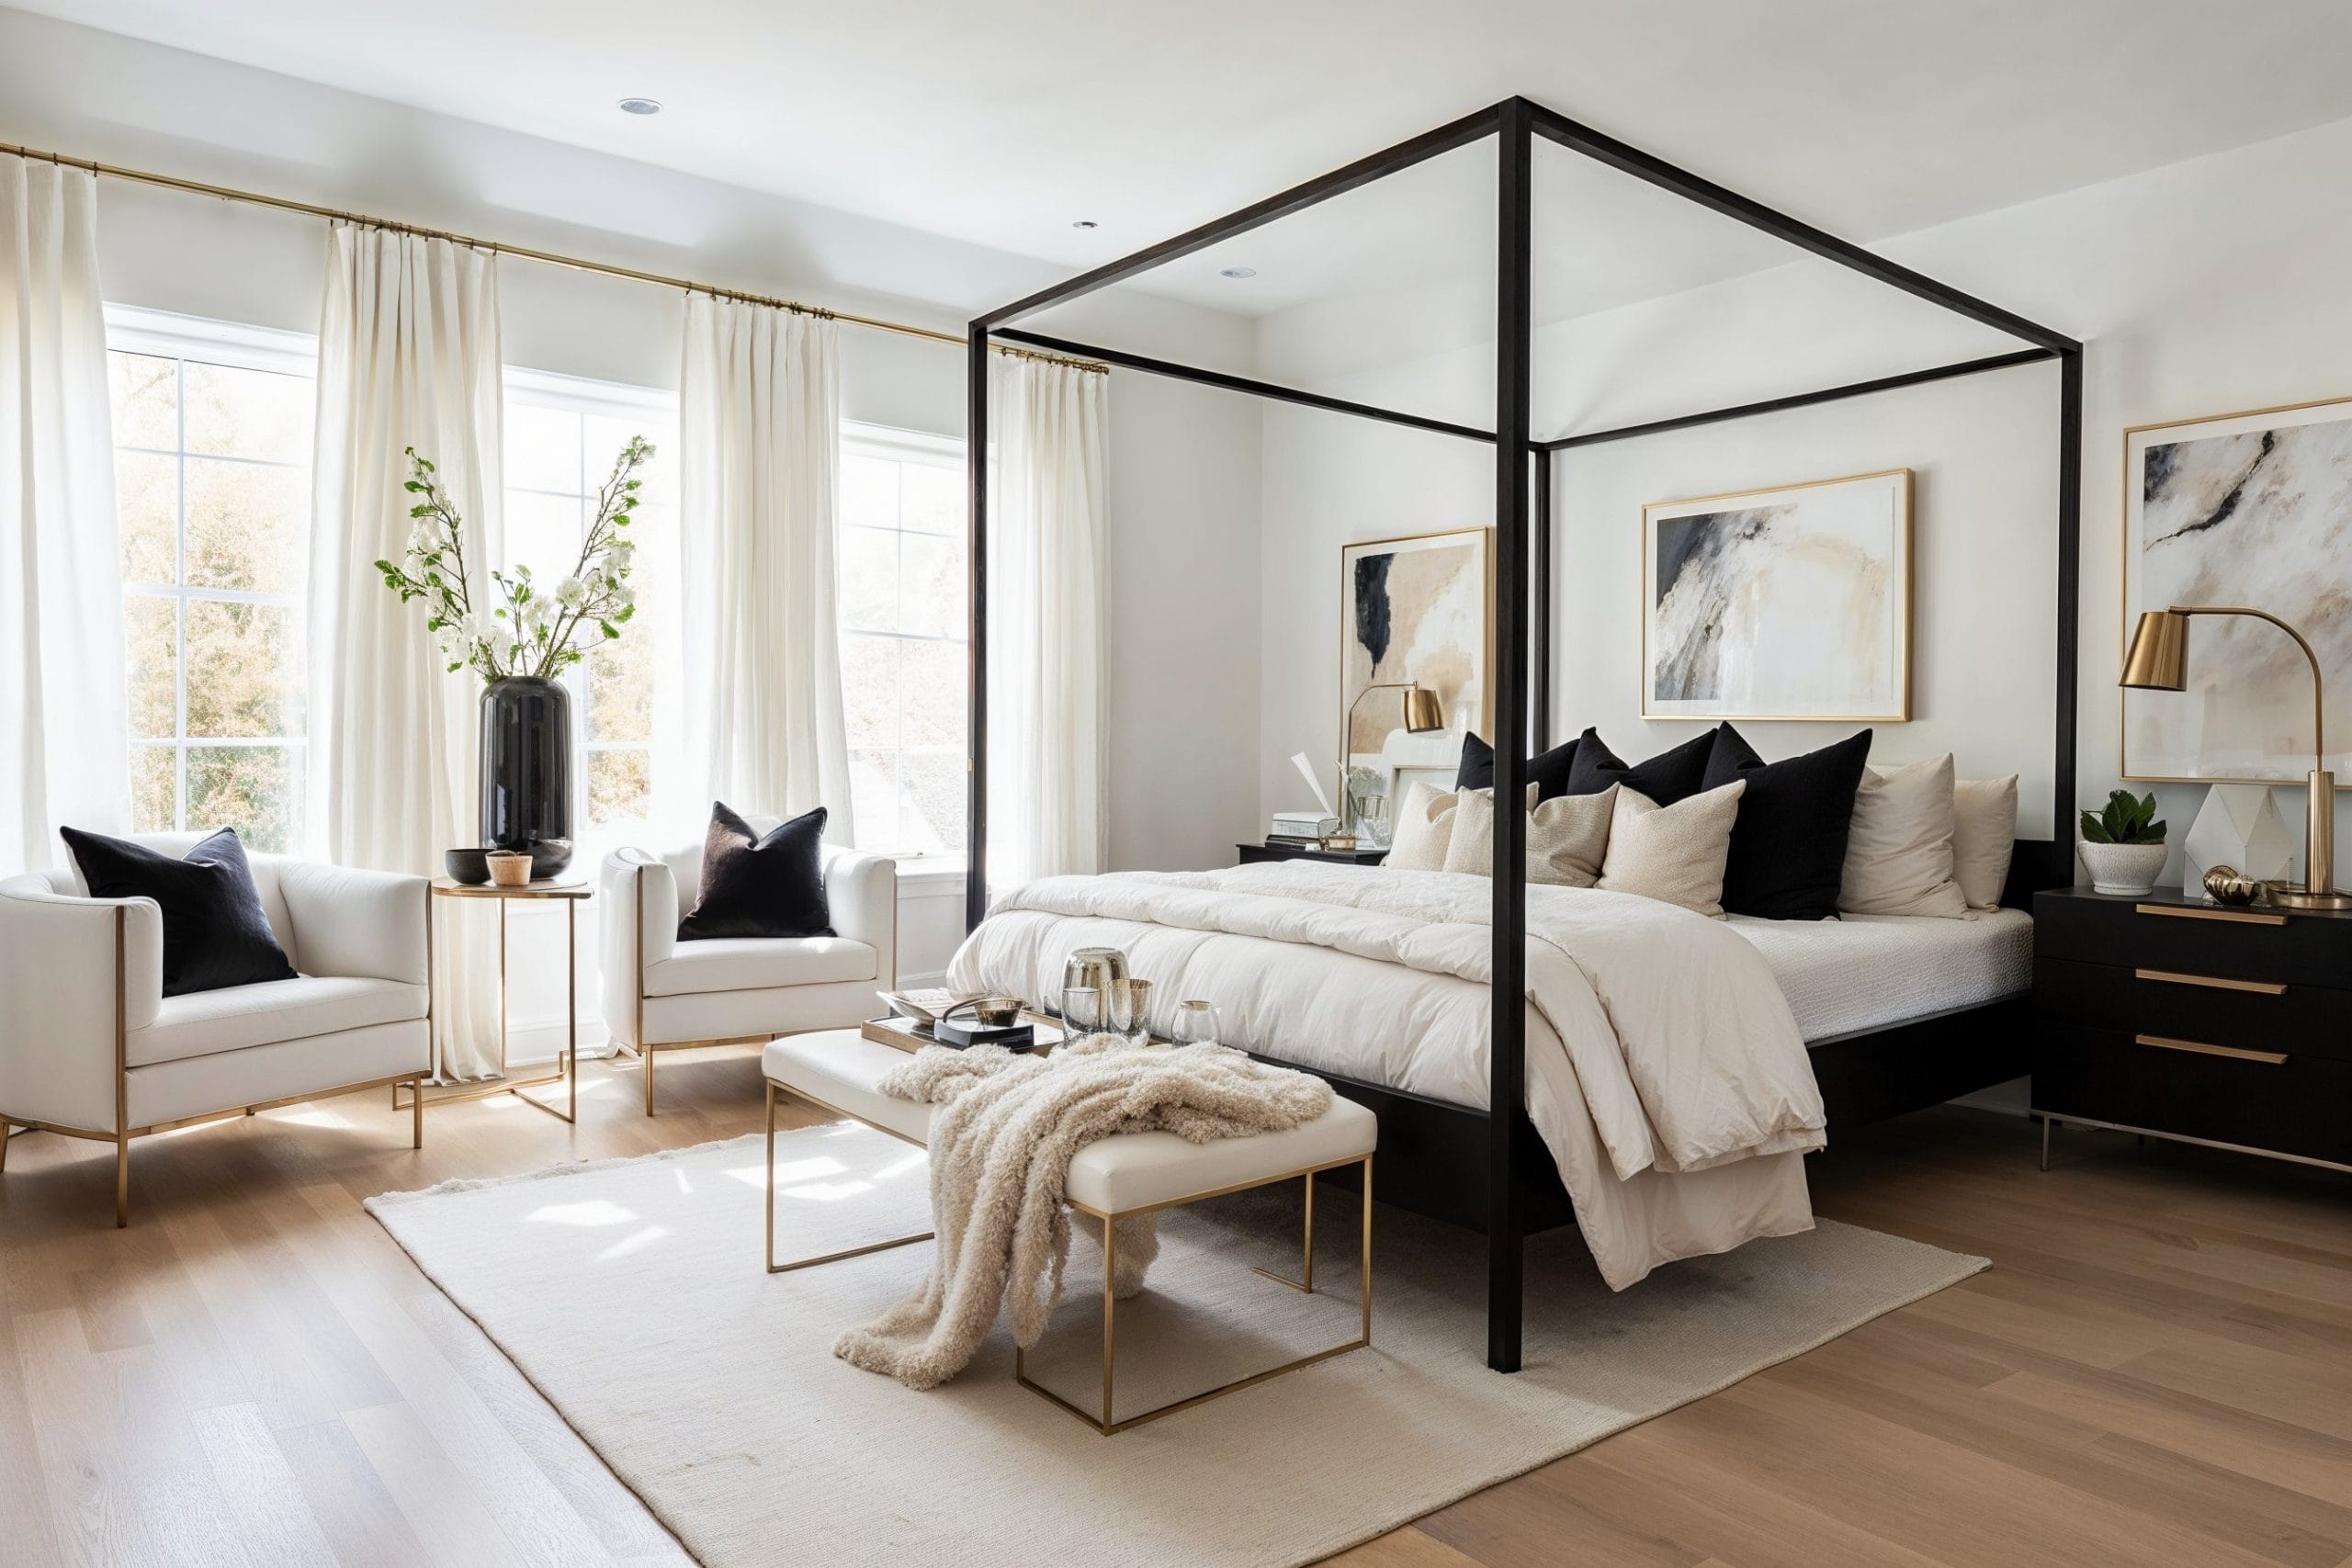 5 Tips for Creating a Cozy Bedroom - Organize by Dreams